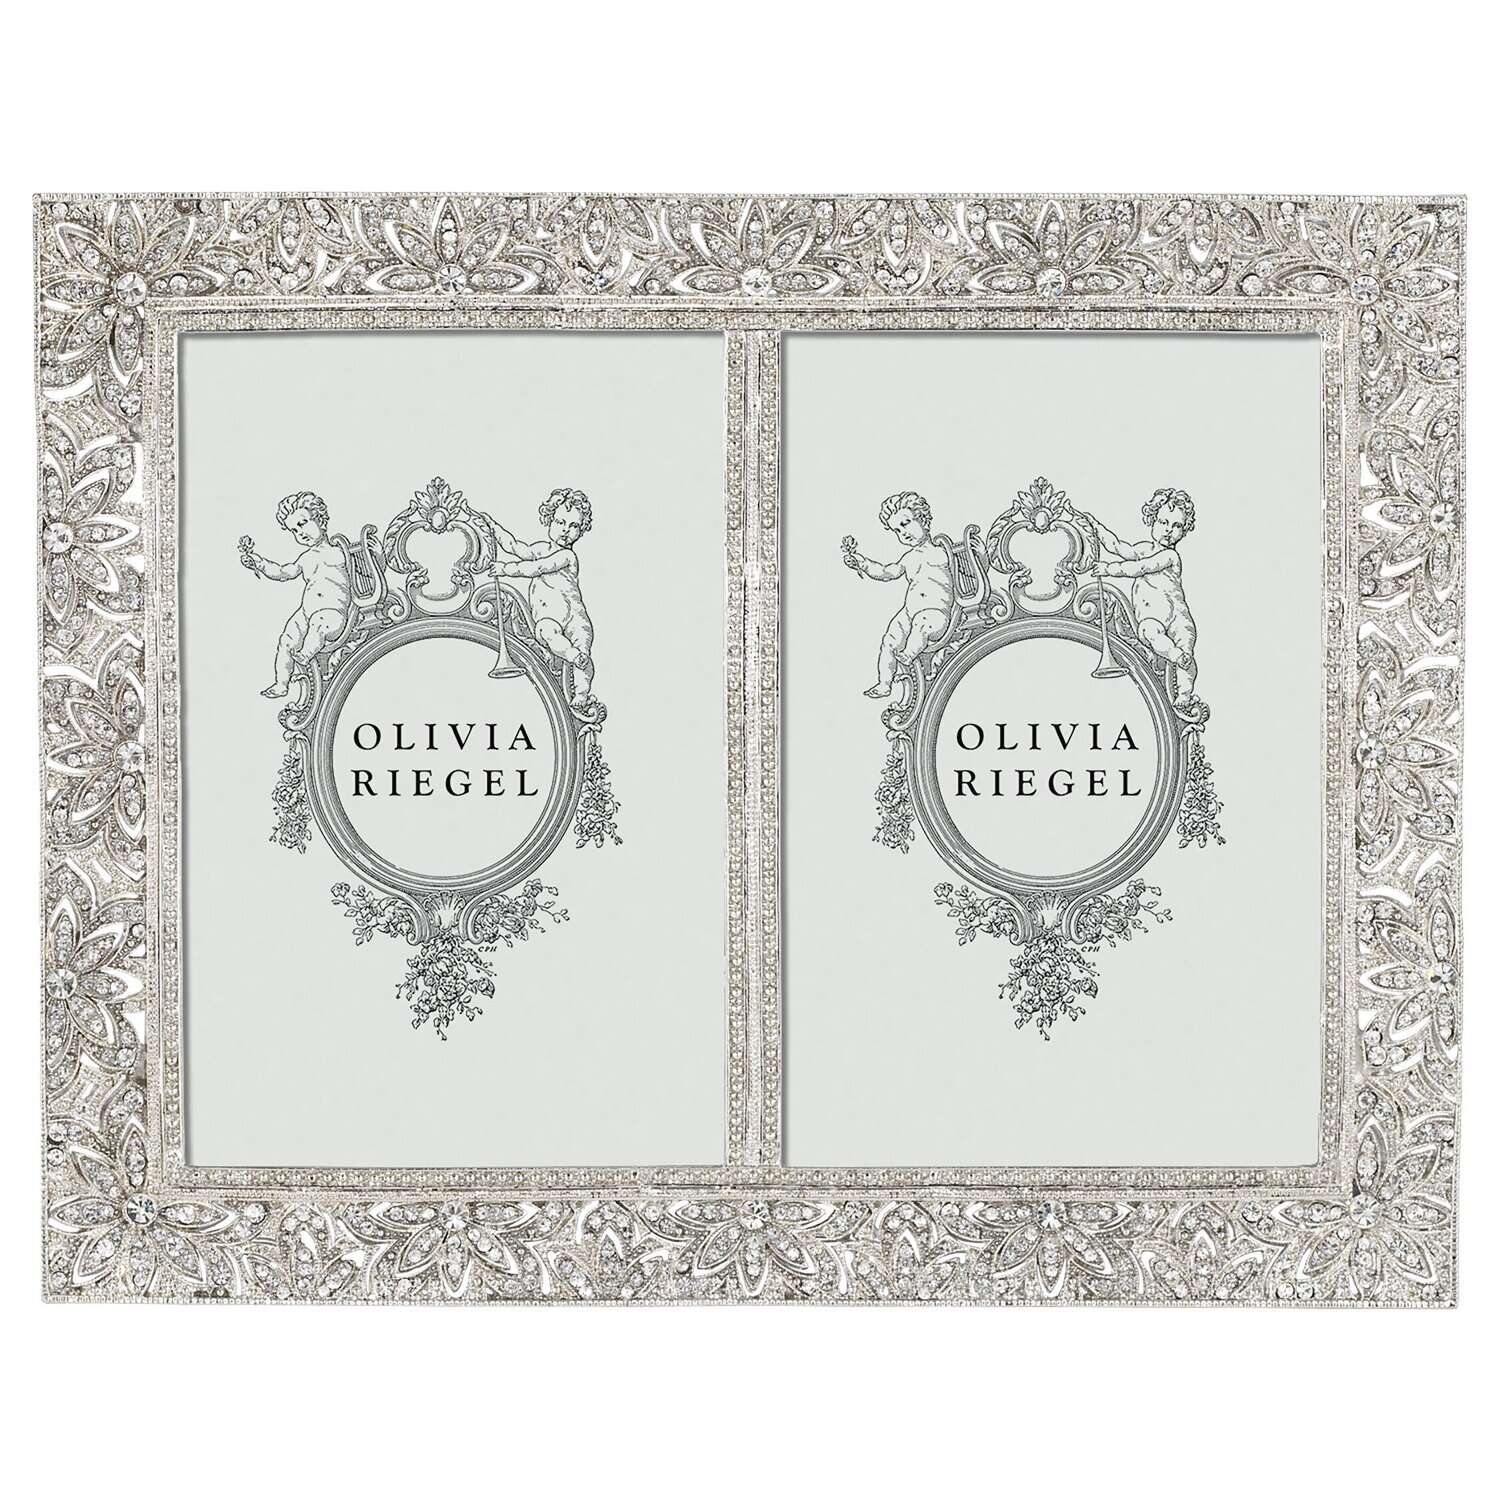 Olivia Riegel Silver Windsor 4 x 6 Double Inch Picture Frame RT1742